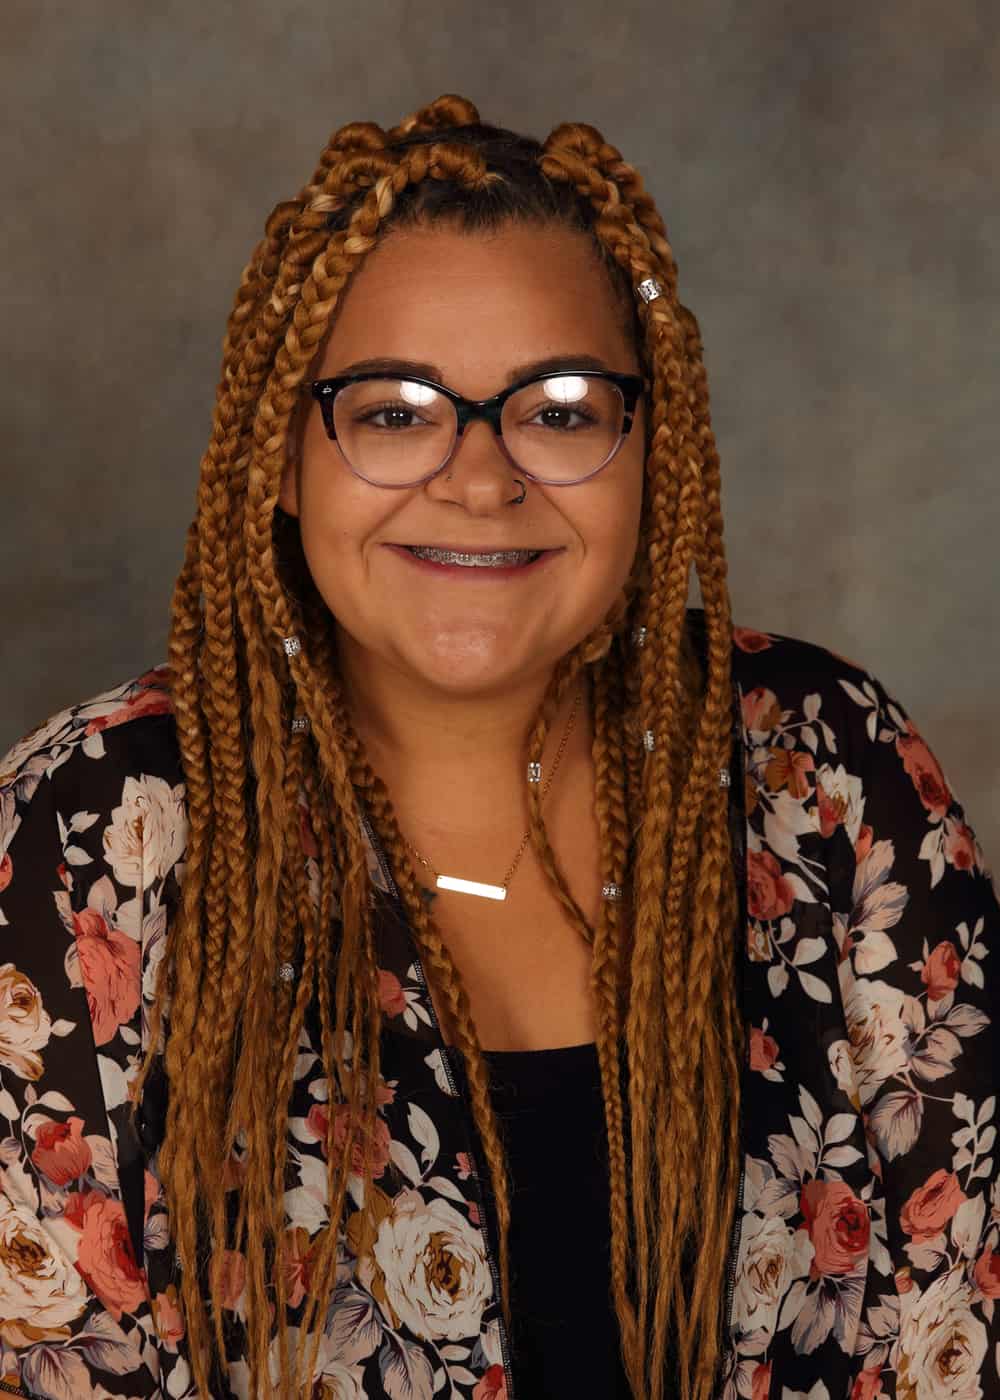 Photo of Co-Teacher Marshell Davis. She is a smiling African-American woman with light brown braids, black-framed glasses, and a bright smile. She is wearing a black shirt and a black blouse with a white and pink floral pattern.